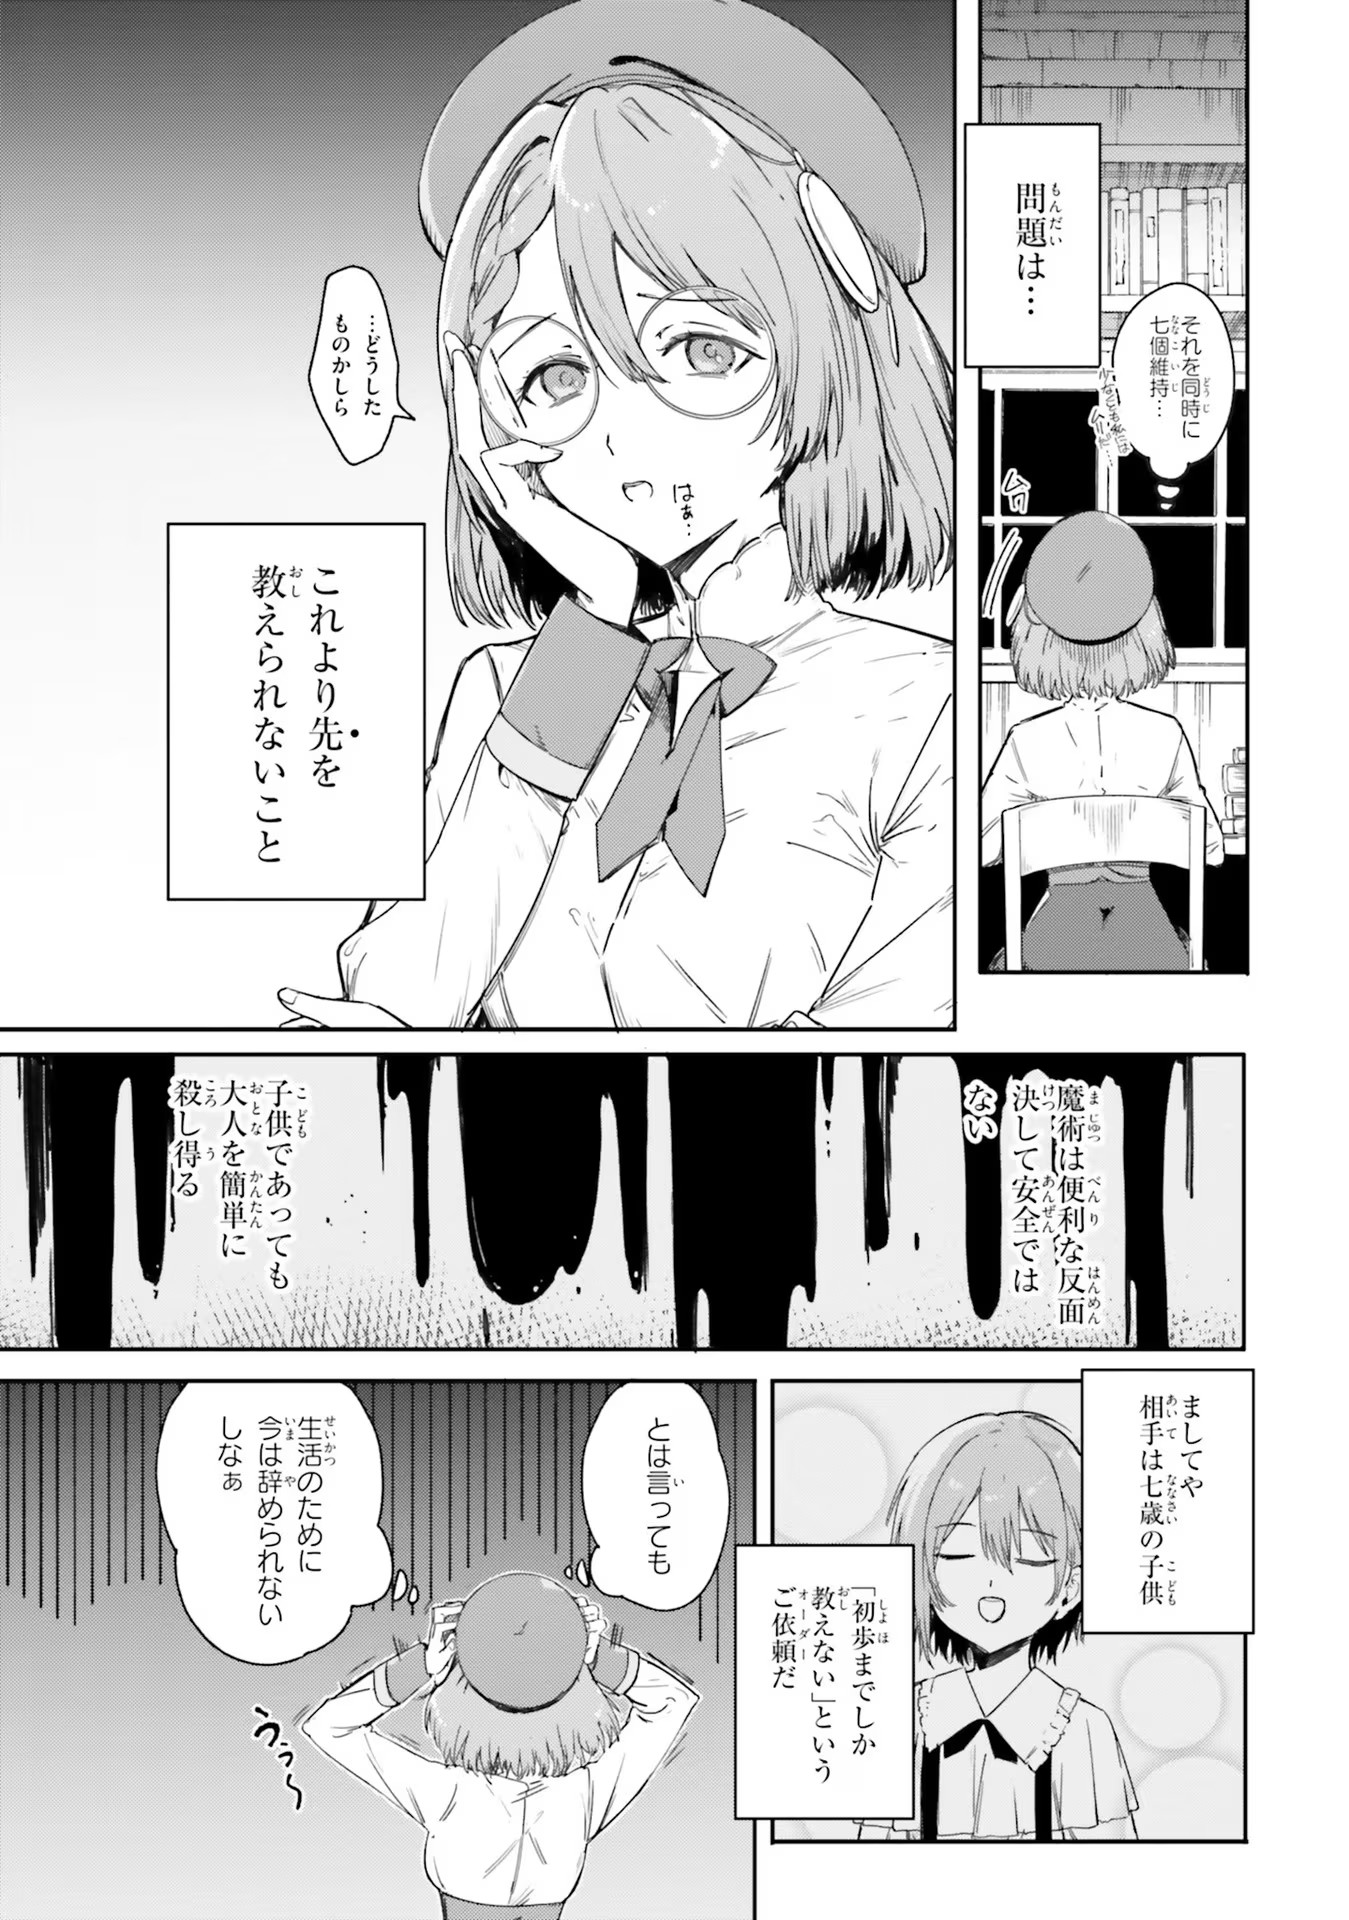 Kunon the Sorcerer Can See Kunon the Sorcerer Can See Through 魔術師クノンは見えている 第1話 - Page 24